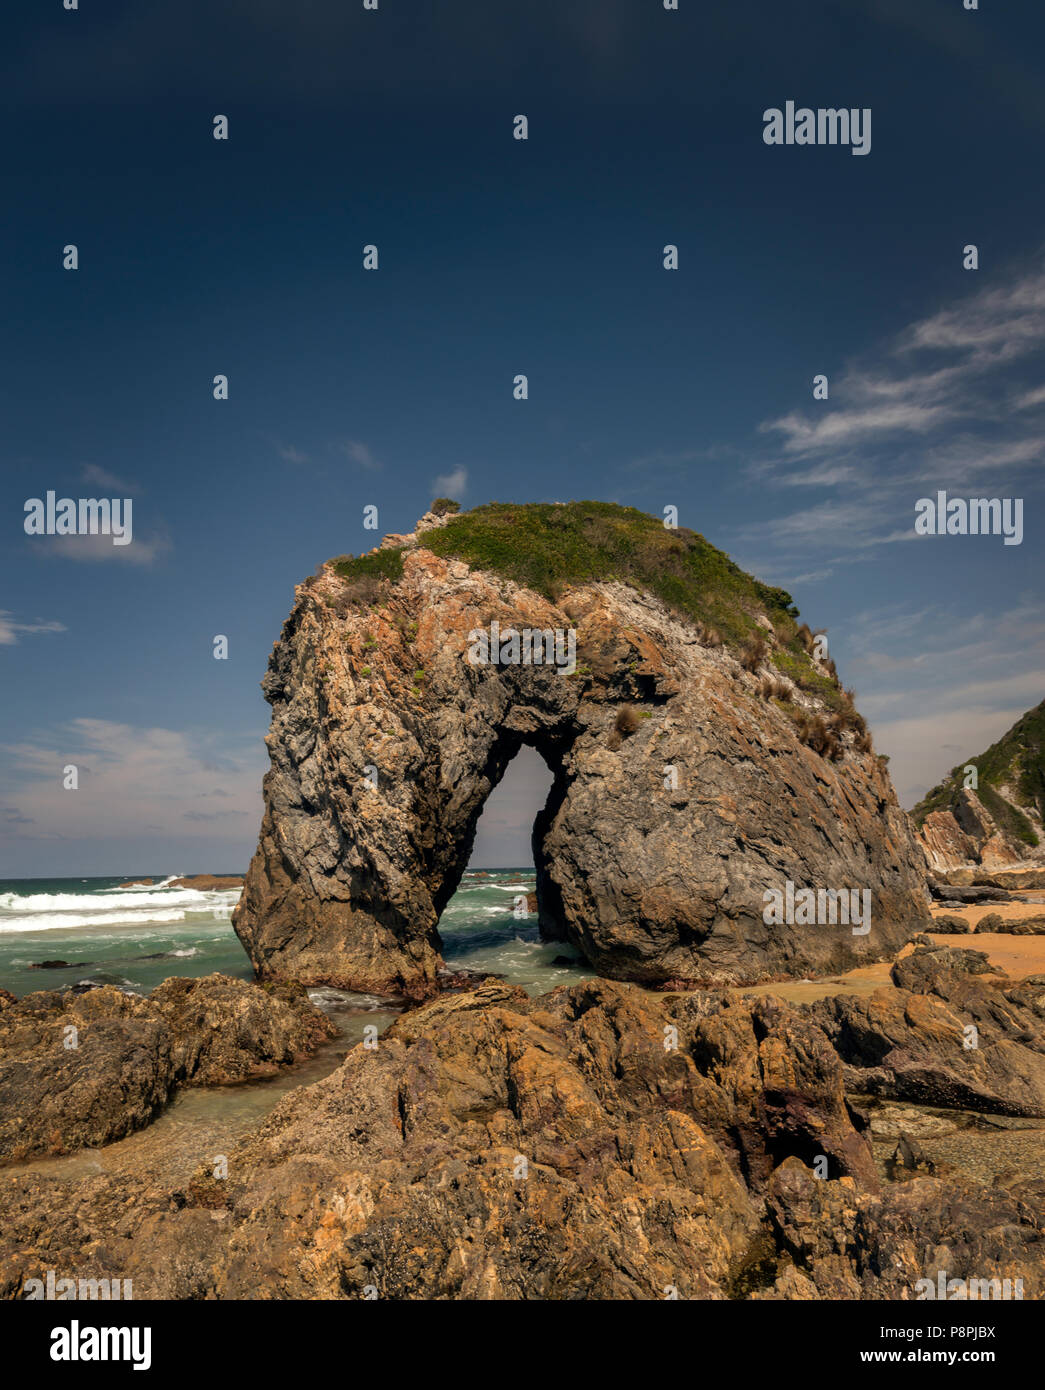 Horse Head Rock,natural rock structure located near Bermagui a small fishing village on the South Coast of New South Wales, Australia. Stock Photo